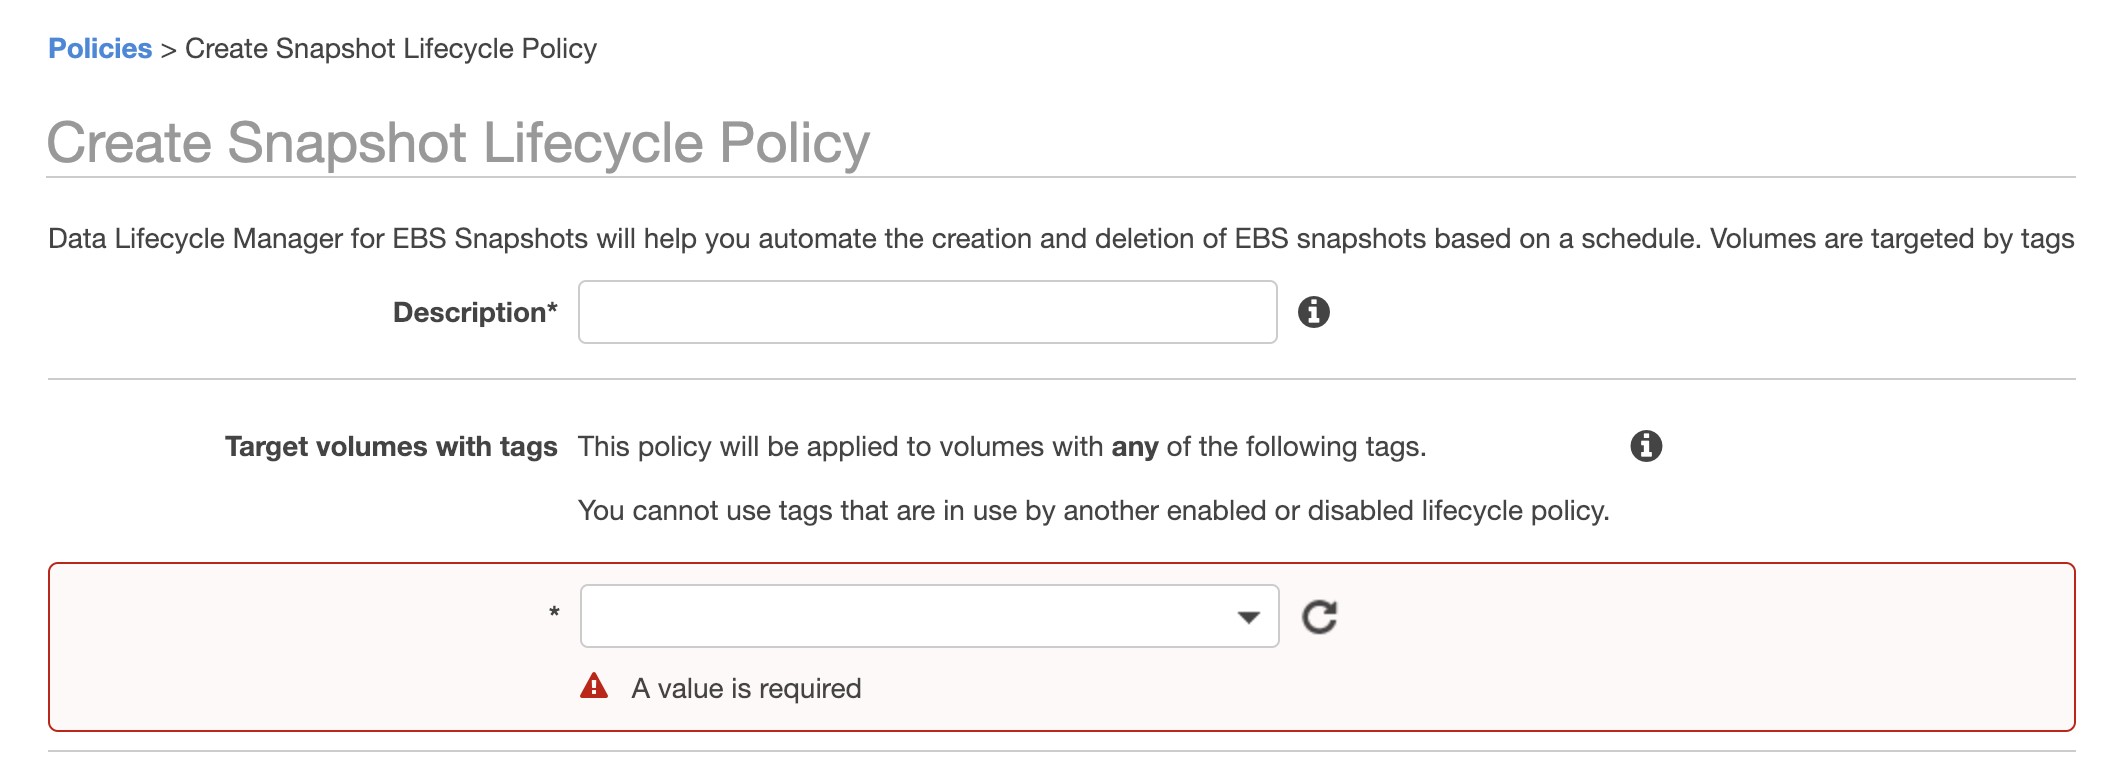 Policies > Create Snapshot Lifecycle Policy

Create Snapshot Lifecycle Policy

Data Lifecycle Manager for EBS Snapshots will help you automate the creation and deletion of EBS snapshots based on a schedule. Volumes are targeted by tags

Description* e

Target volumes with tags This policy will be applied to volumes with any of the following tags. (i)

You cannot use tags that are in use by another enabled or disabled lifecycle policy.

* w GC

A A value is required